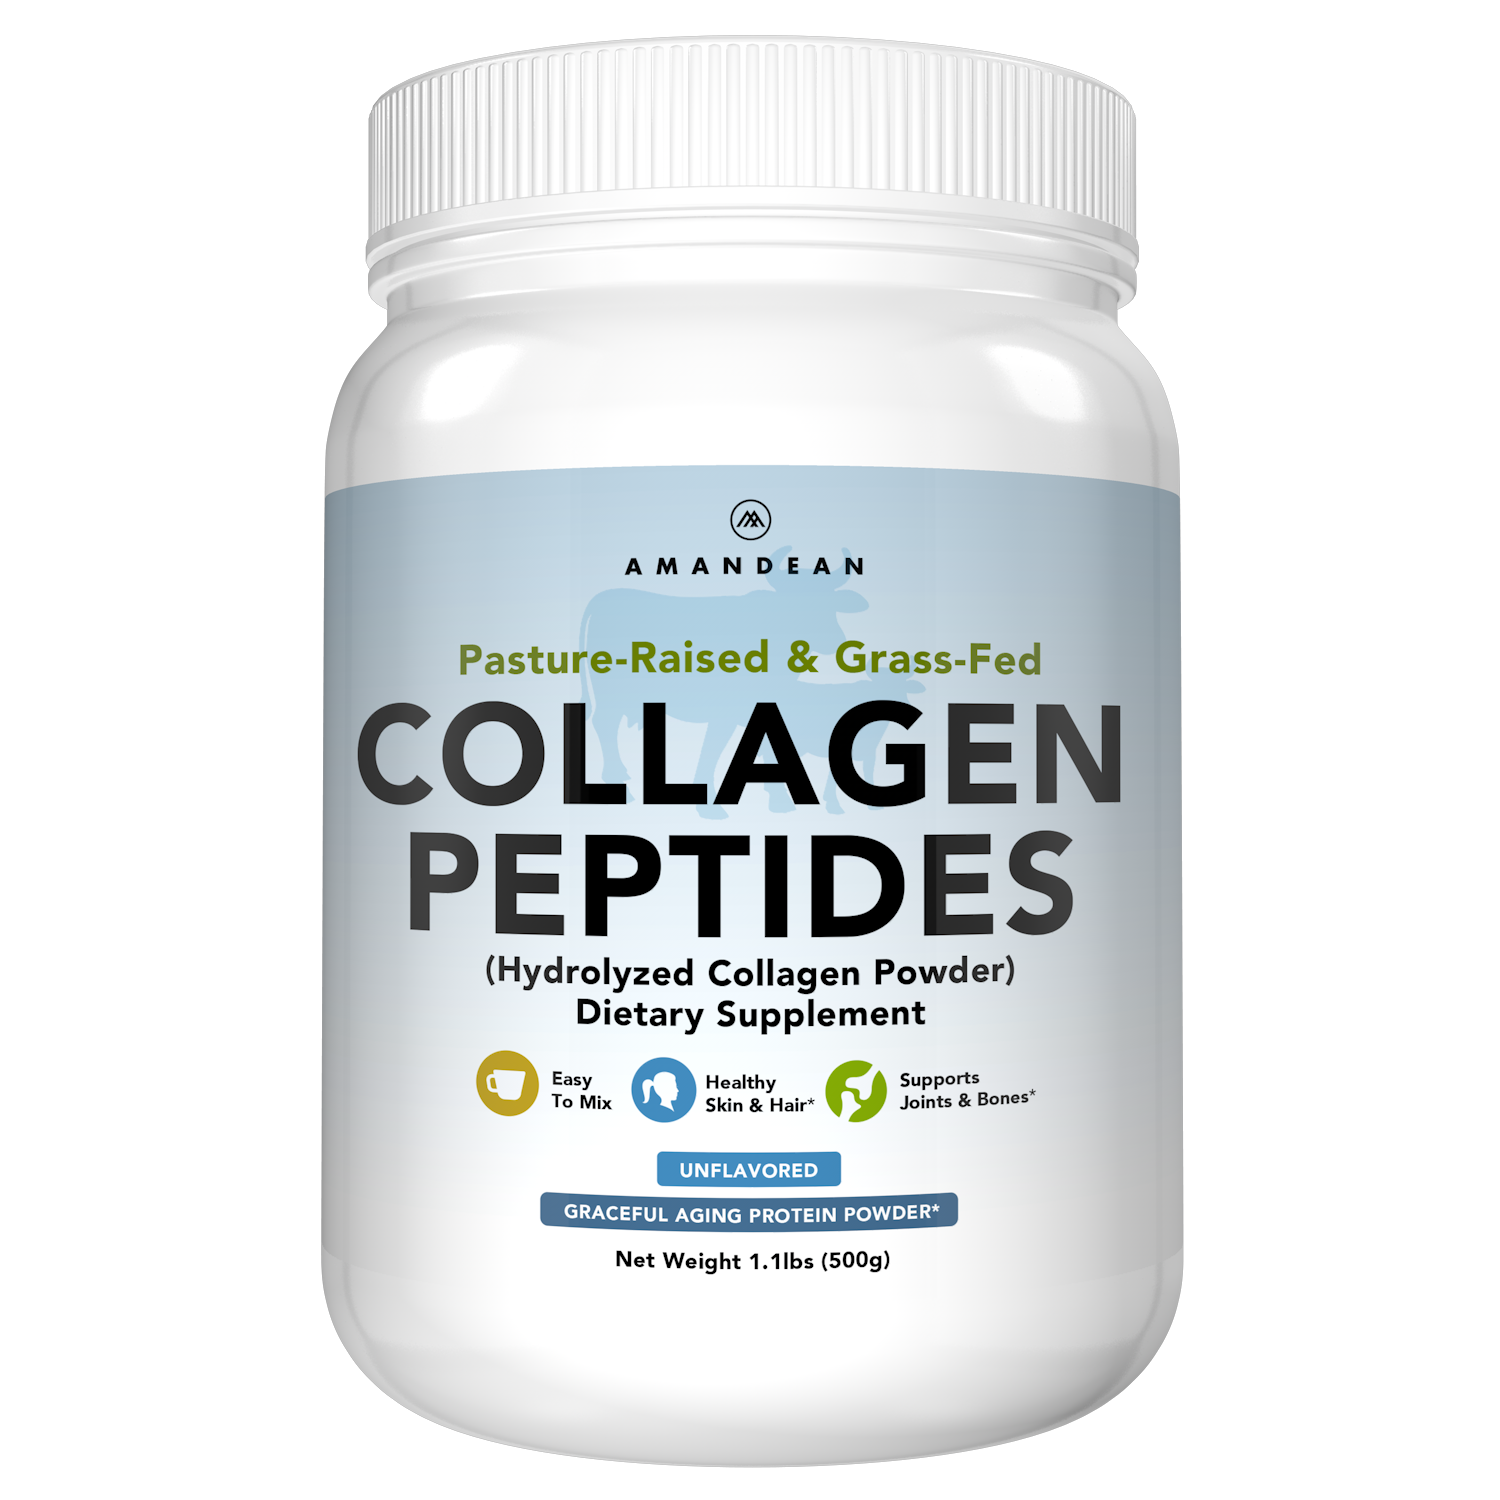 Amandean Grass-Fed, Pasture-Raised unflavored collagen peptides for hair, nails, skin, joints, bones, flexibility, lean muscle, healthy metabolism. Keto and Paleo friendly collagen protein.